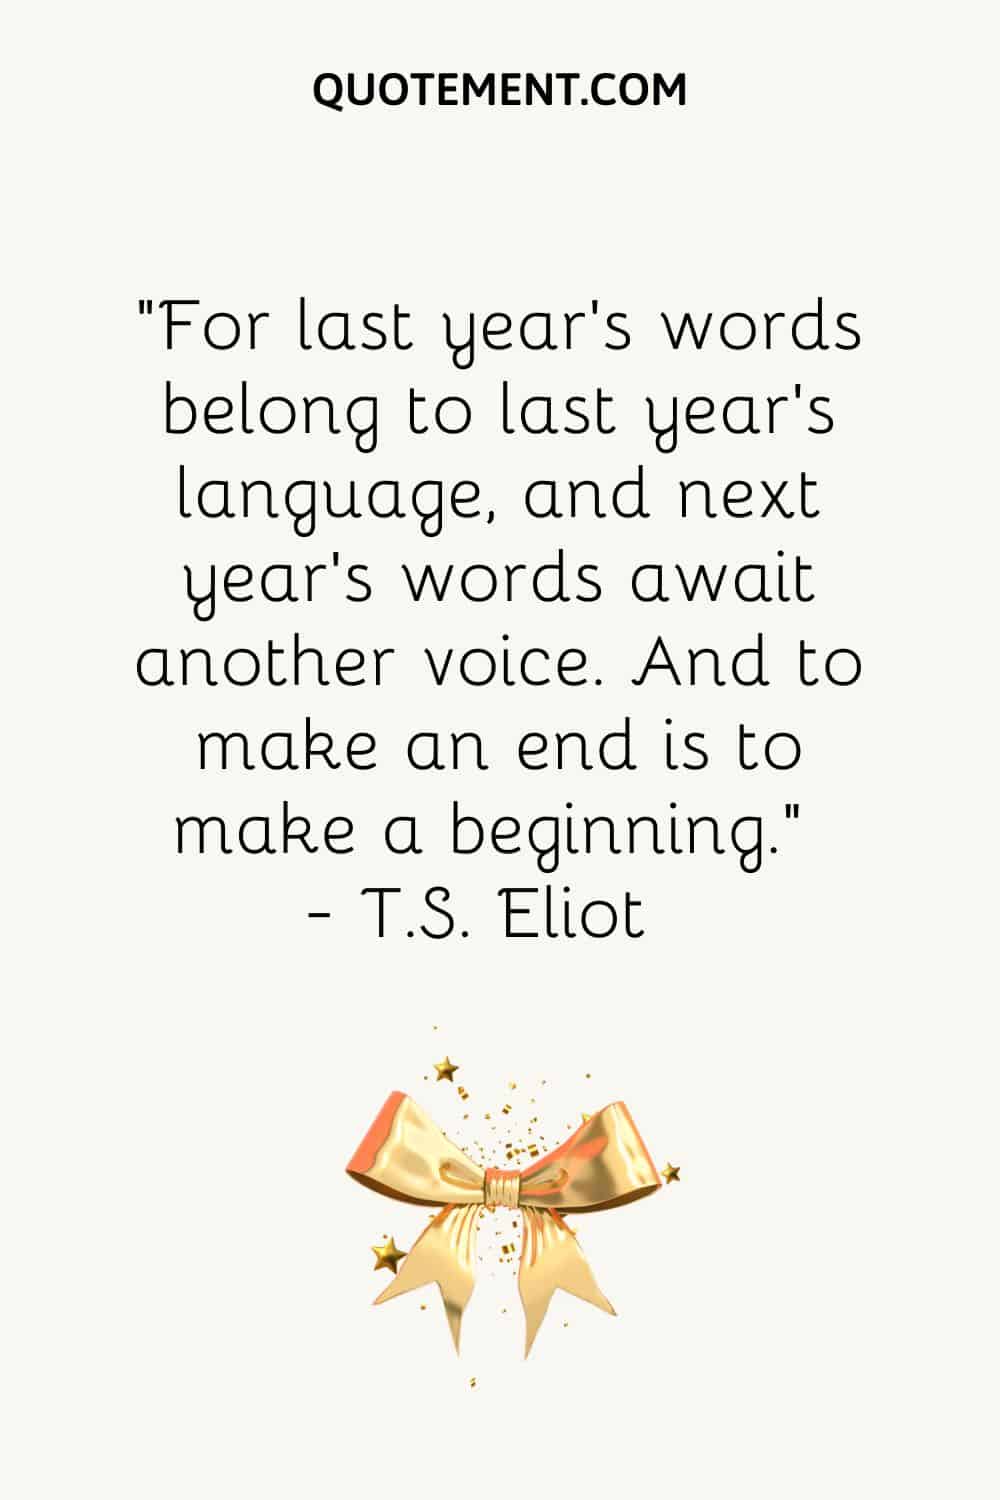 “For last year’s words belong to last year’s language, and next year’s words await another voice. And to make an end is to make a beginning.” ― T.S. Eliot